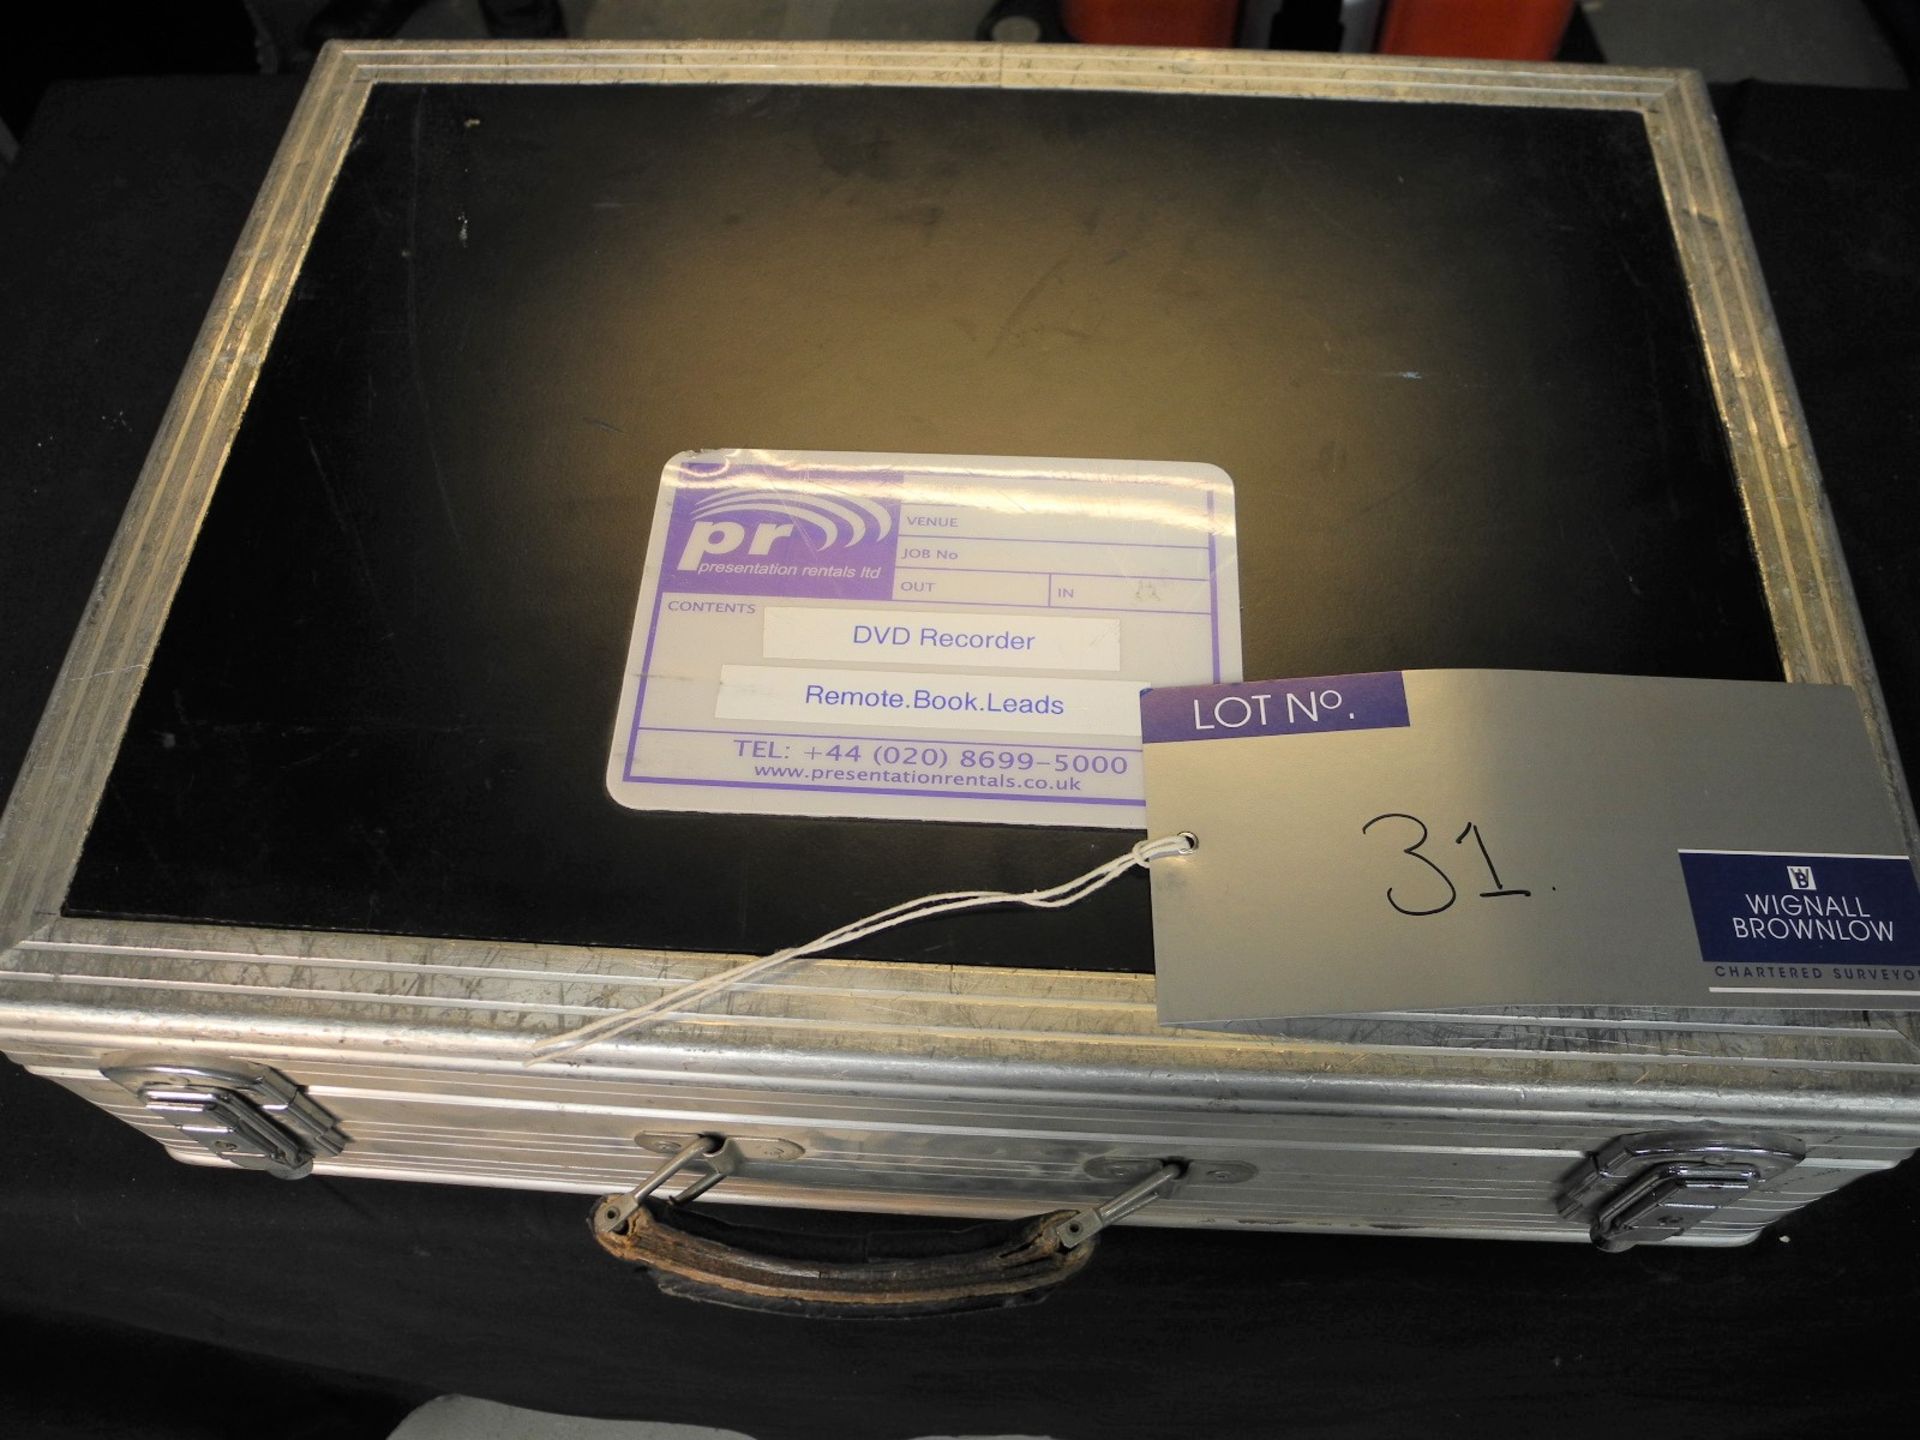 A Samsung DVD-R129 DVD Recorder in flight case, good condition-located at PR Live, Unit 6, Windsor - Image 3 of 3